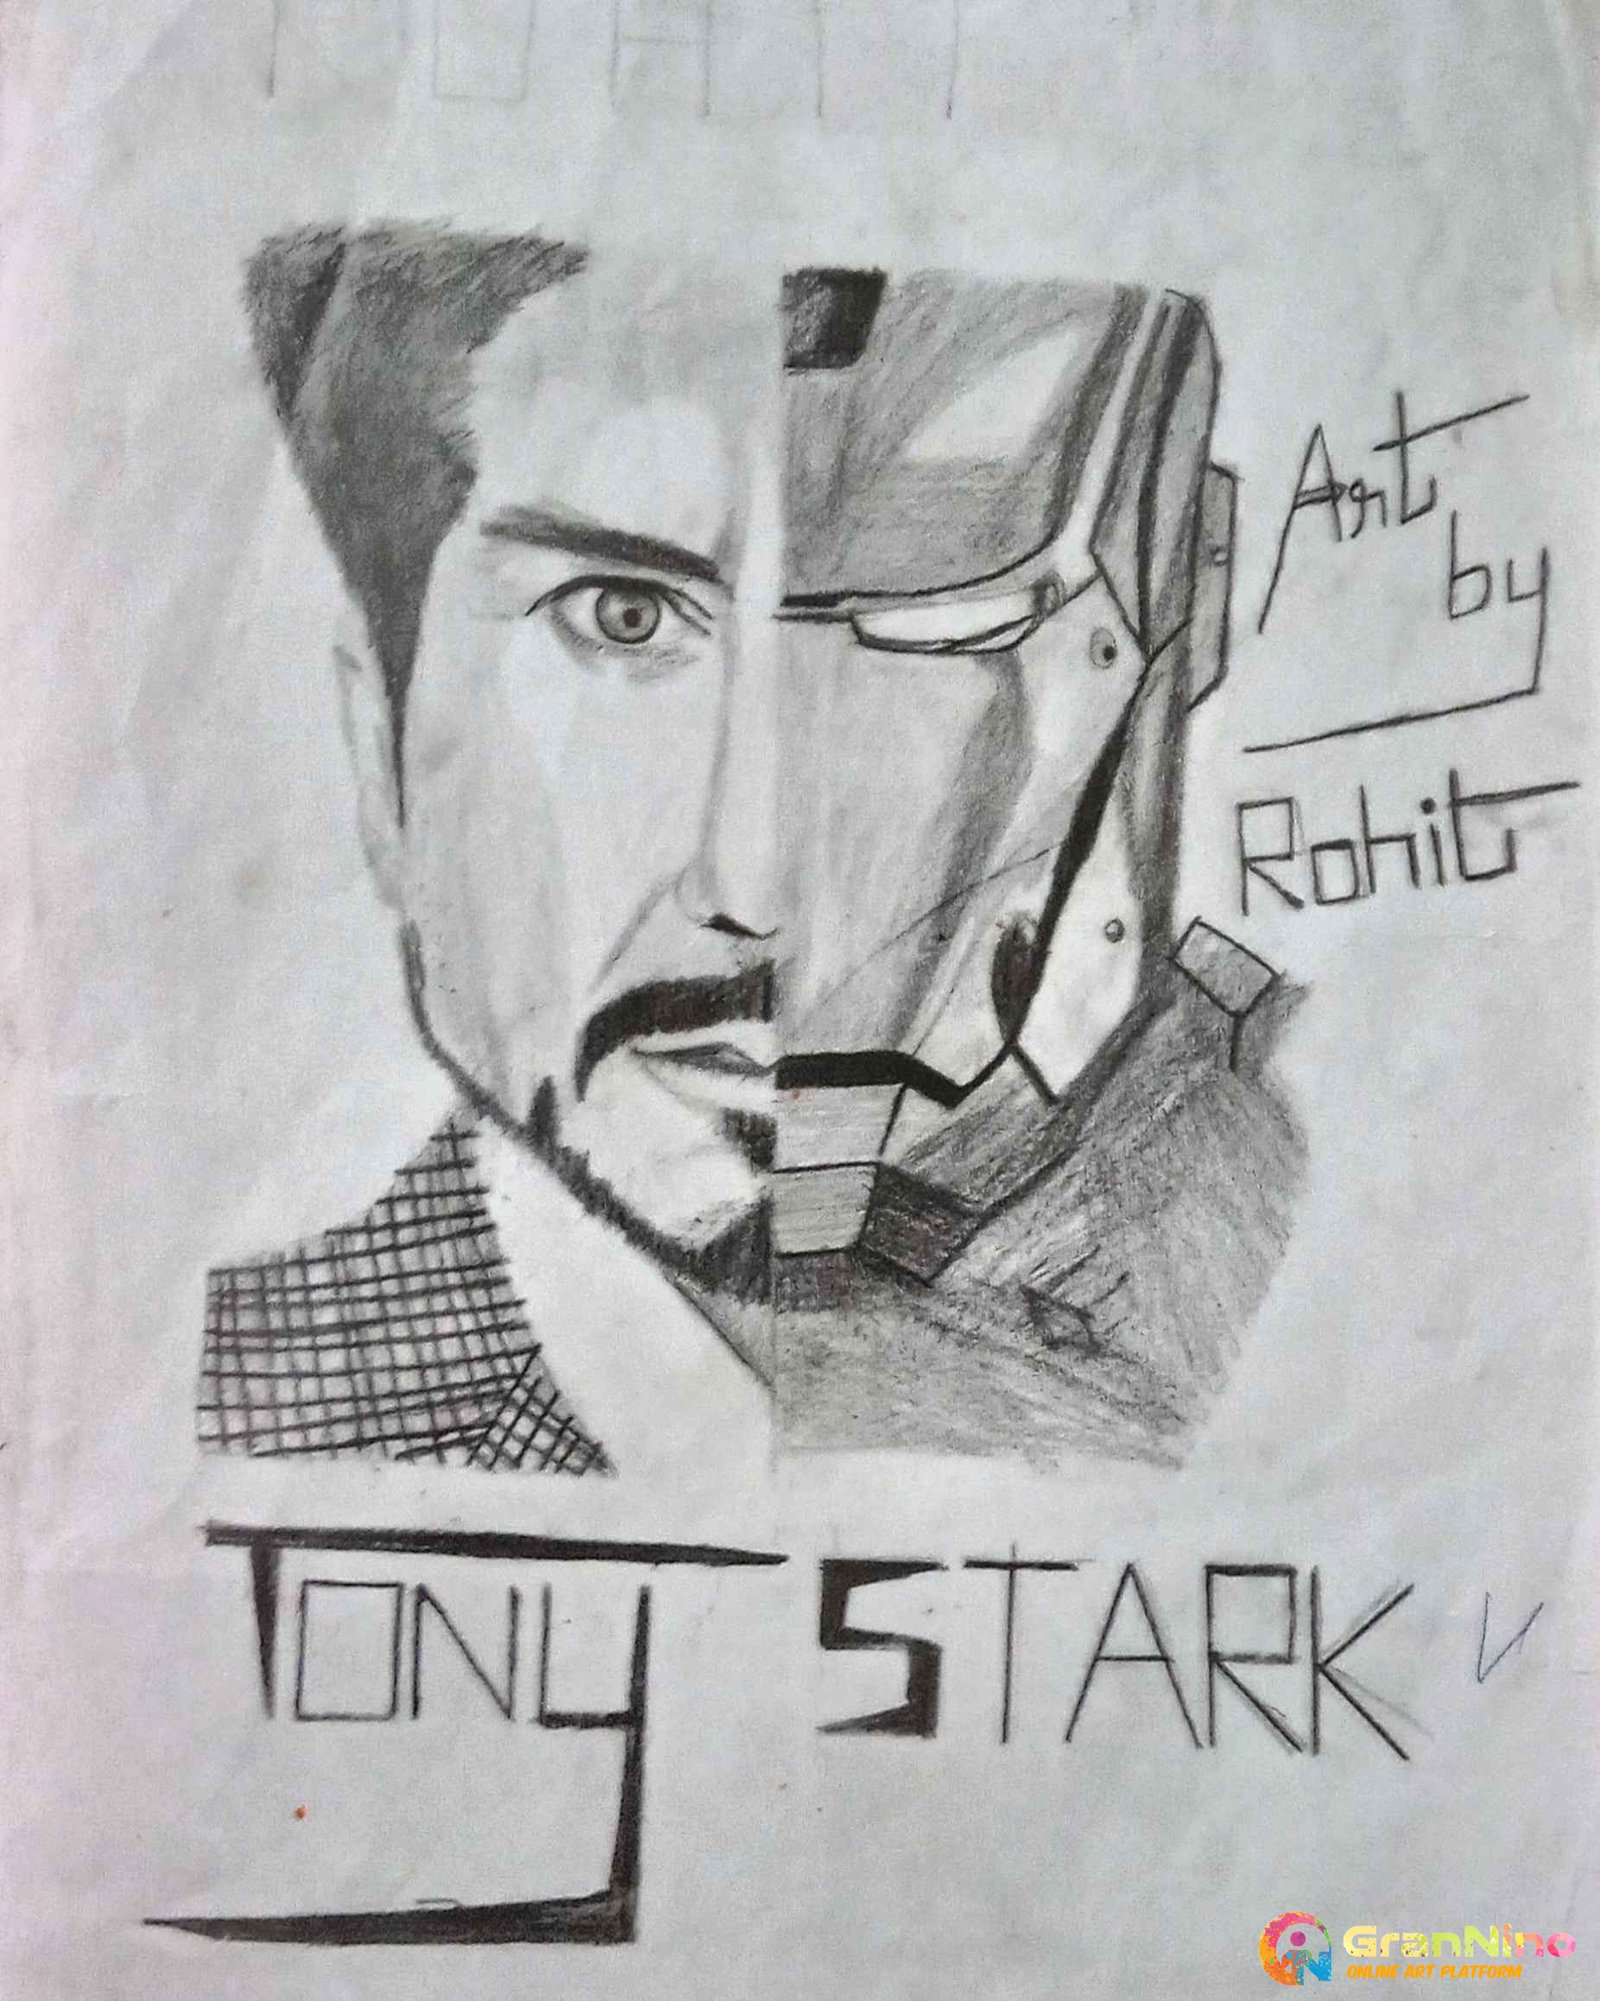 Here's my drawing of Iron Man! : r/marvelstudios-anthinhphatland.vn